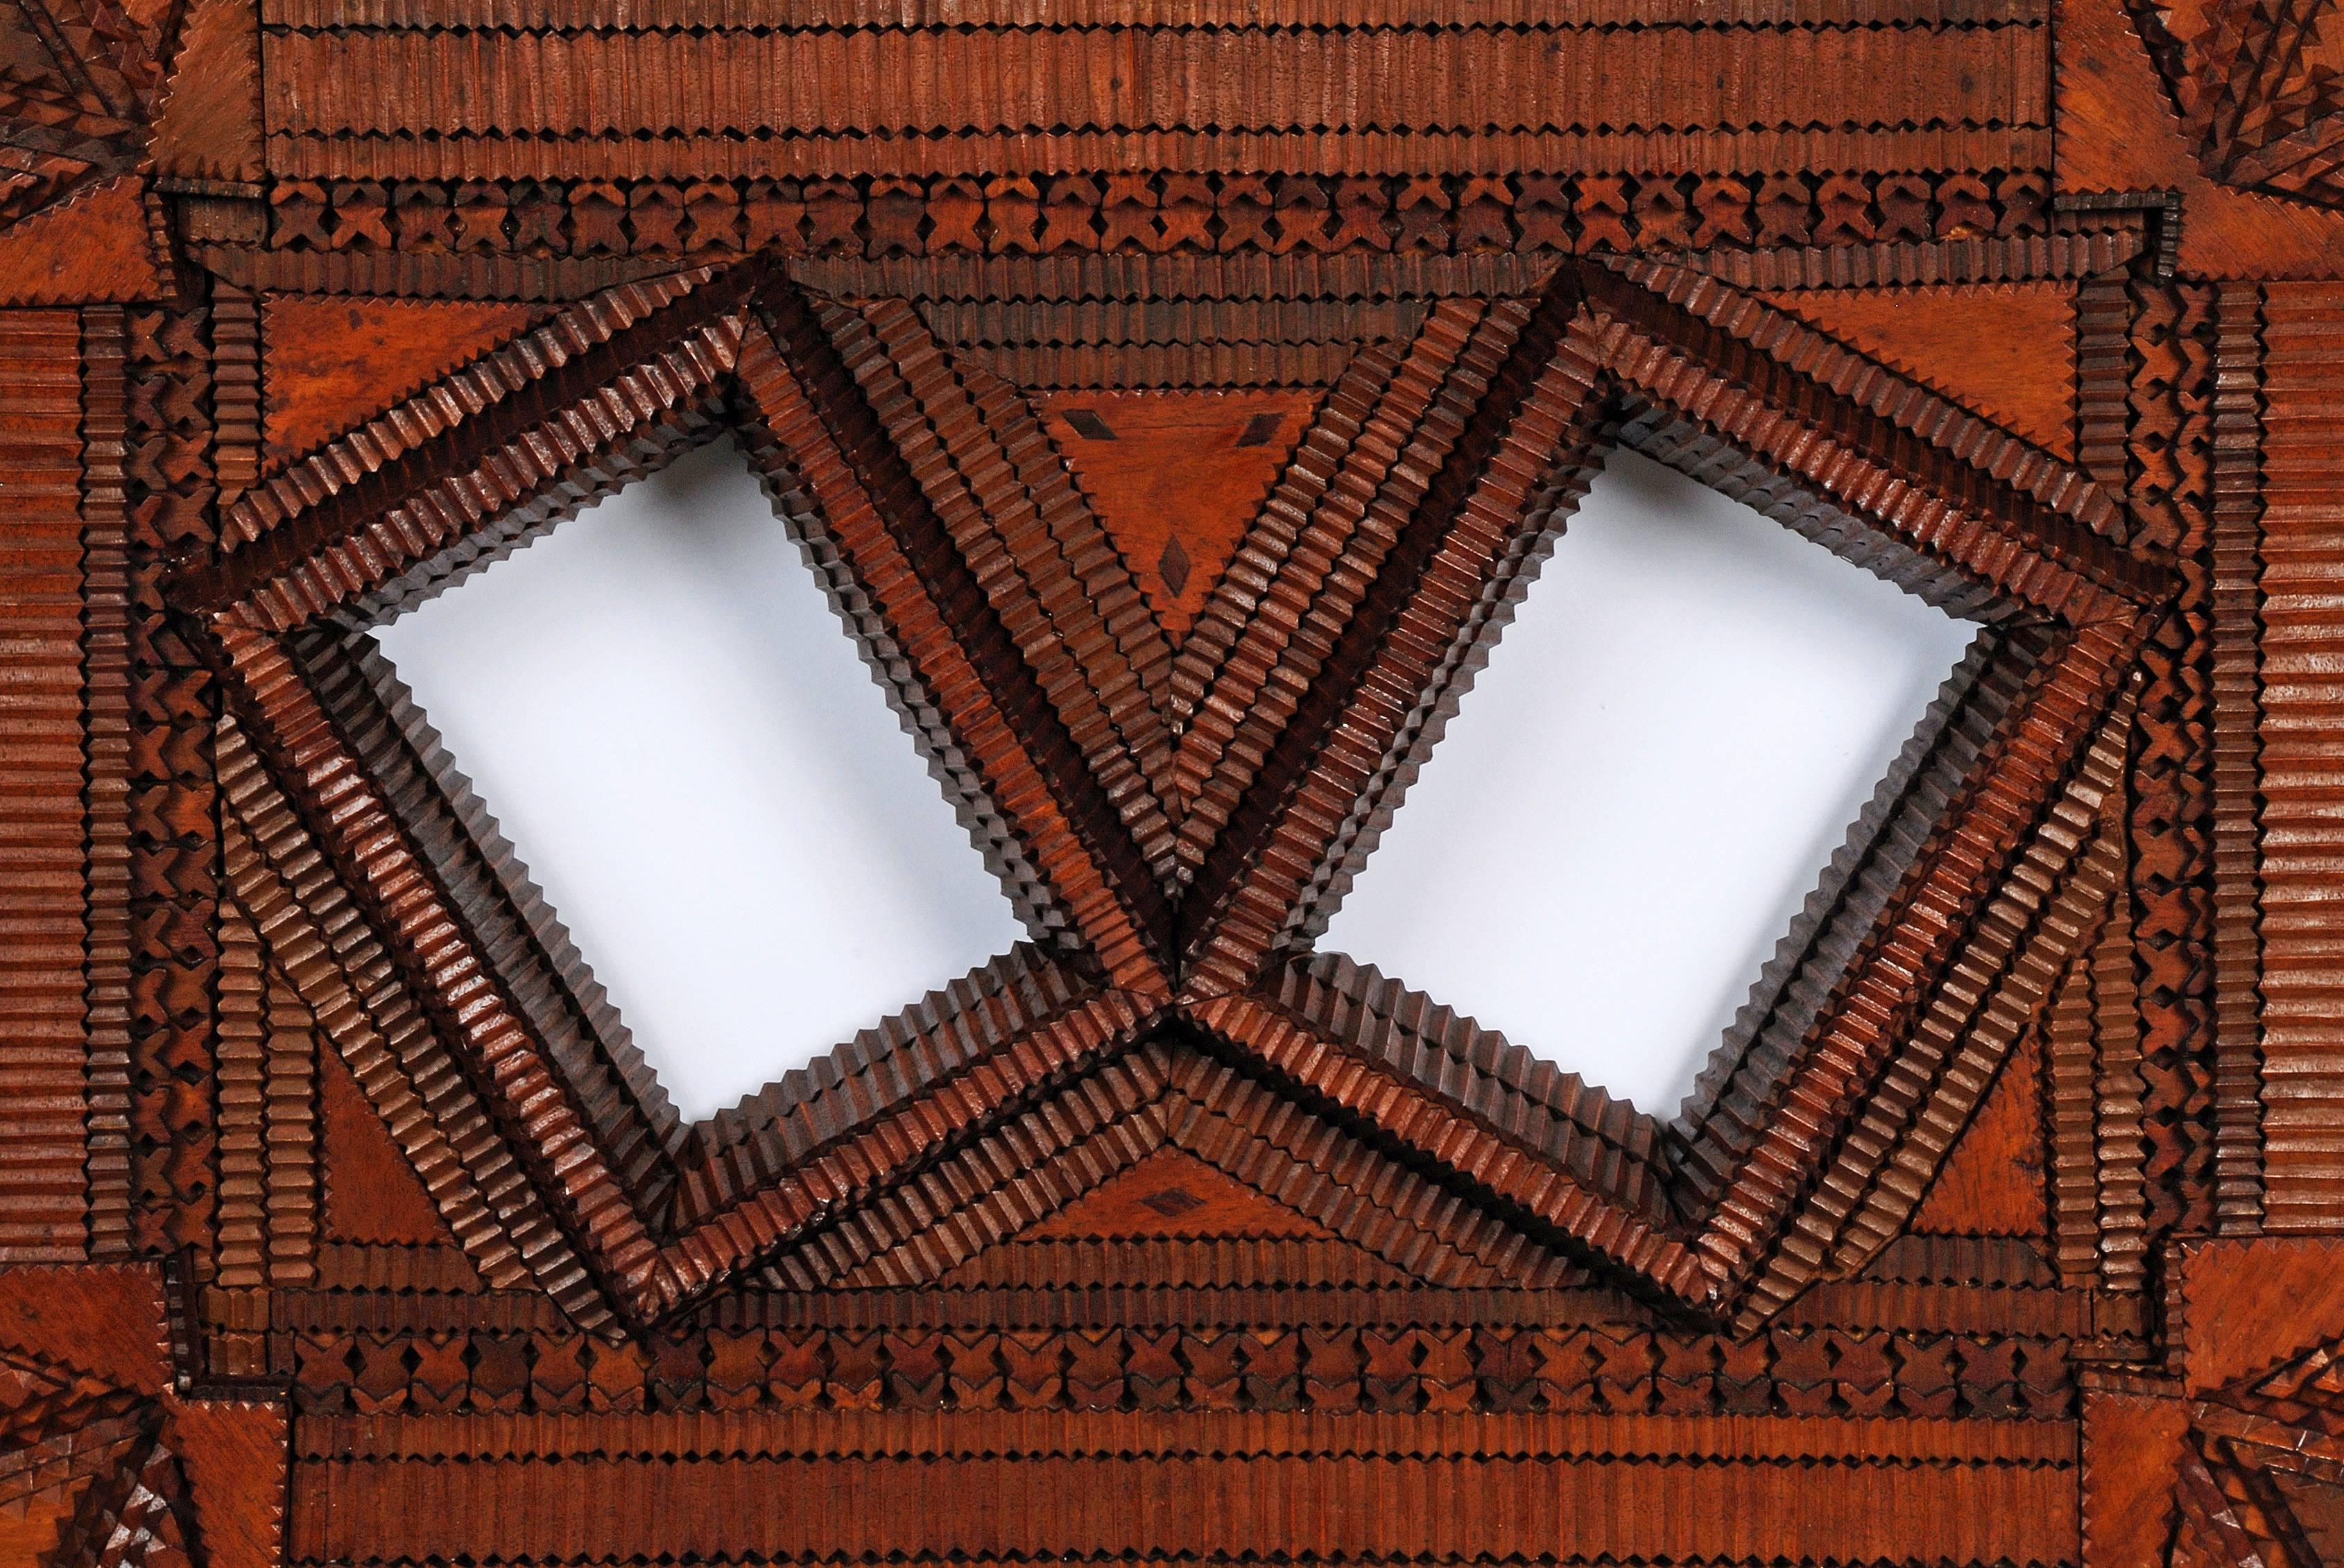 A heavily detailed Tramp Art double portrait frame in the John Zubersky style with floral corners and tulip edges. The frame exhibits hundreds of individually carved pieces applied to a wooden canvas. The openings are raised making a platform to